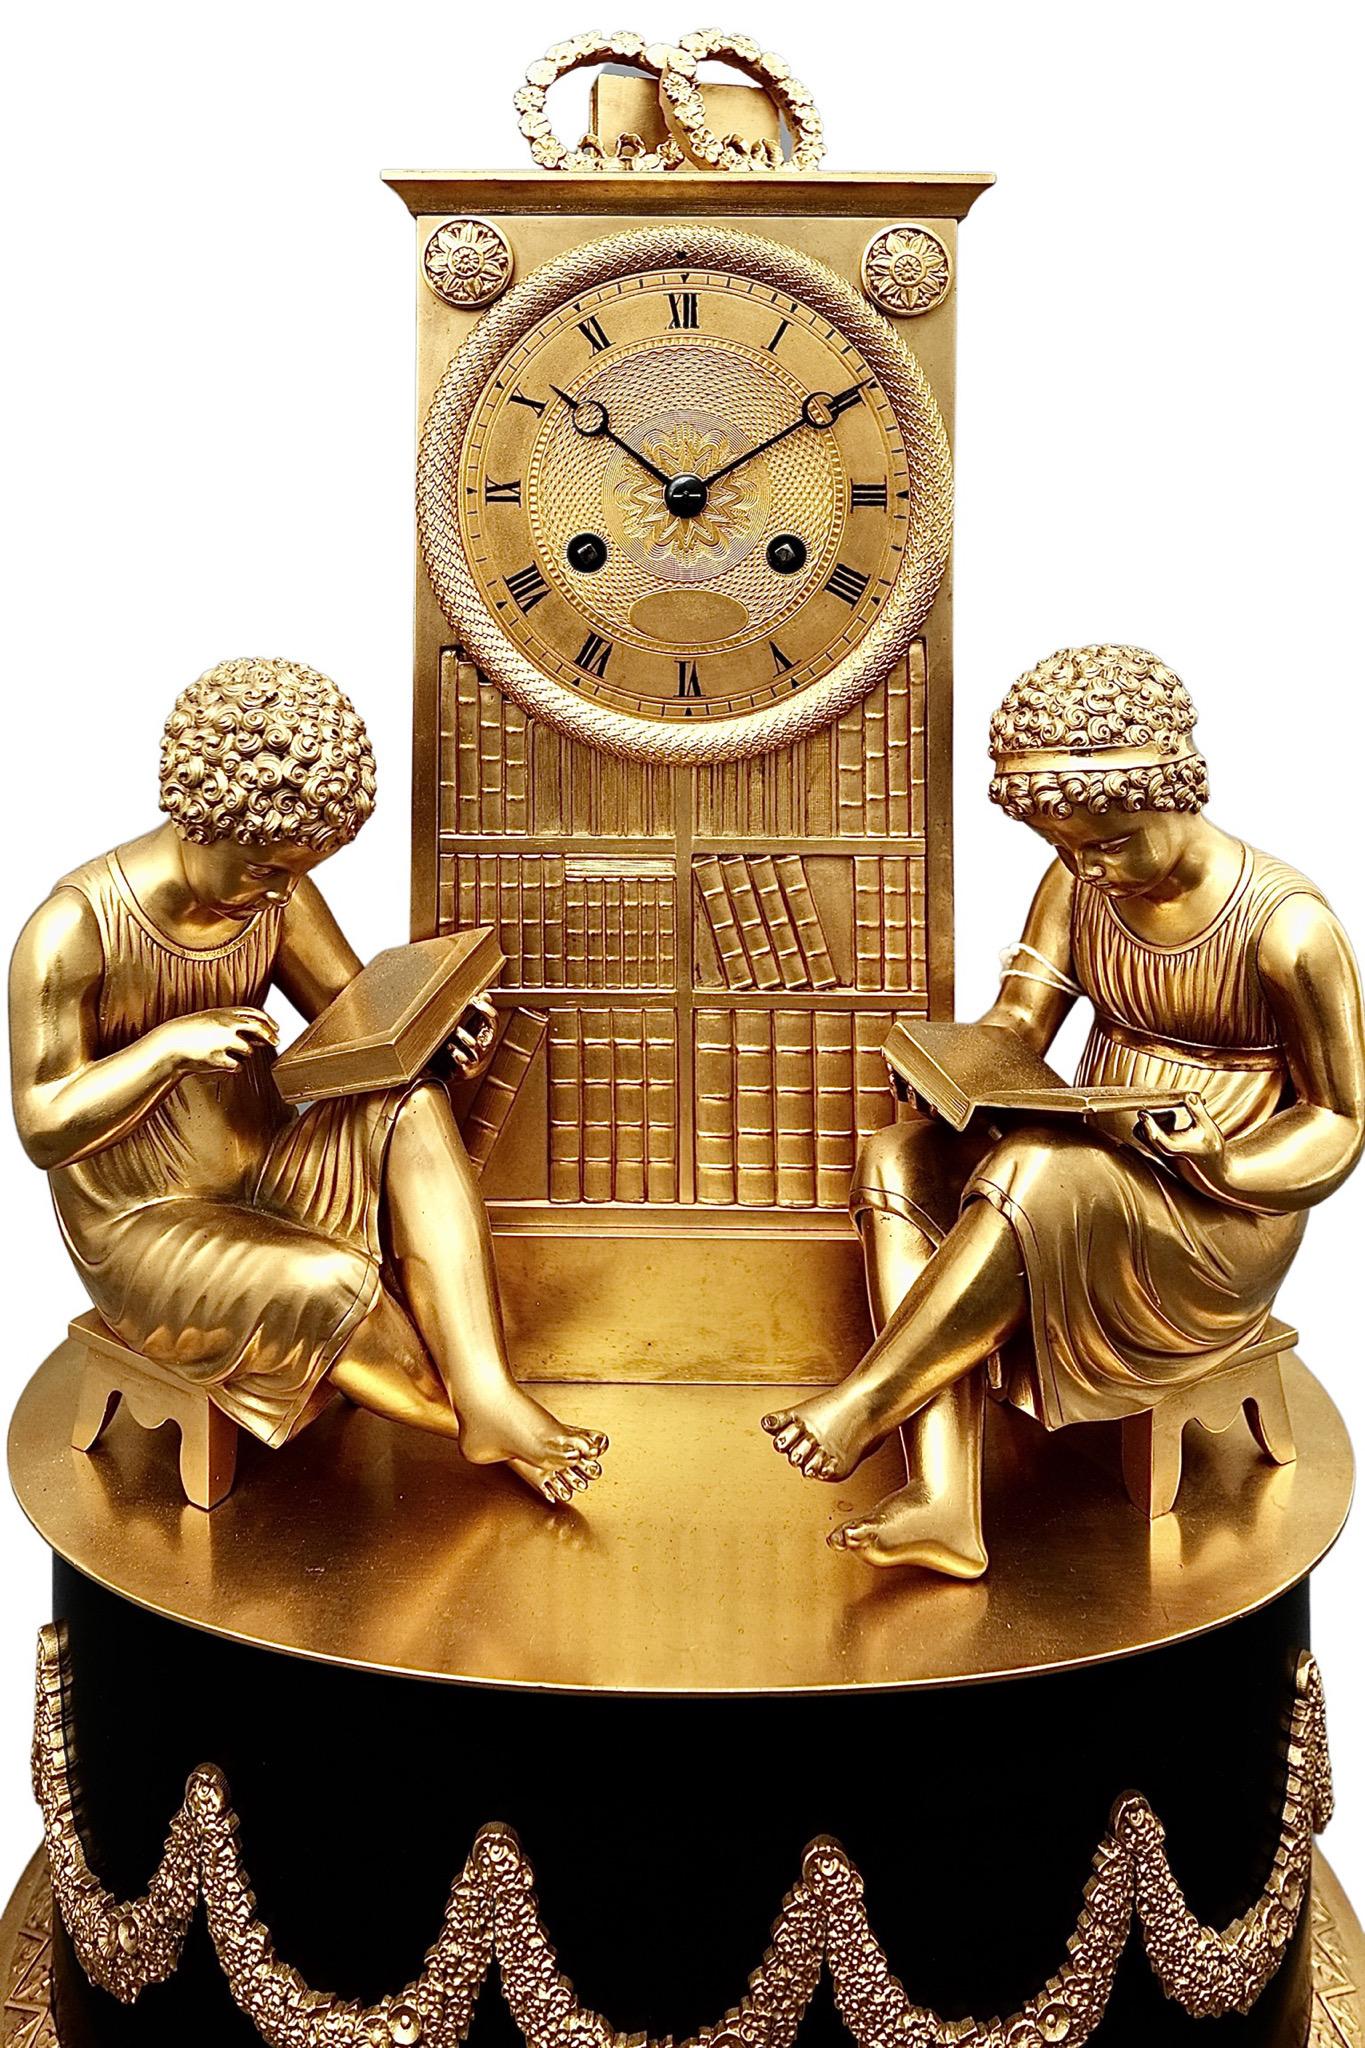 A fascinating Antique French Empire Striking Ormolu mantel clock

A fascinating clock in the form of a library bookcase, with two children sitting at each side. Raised on a plinth on ormolu feet, the Roman dial is cast ormolu with blued steel